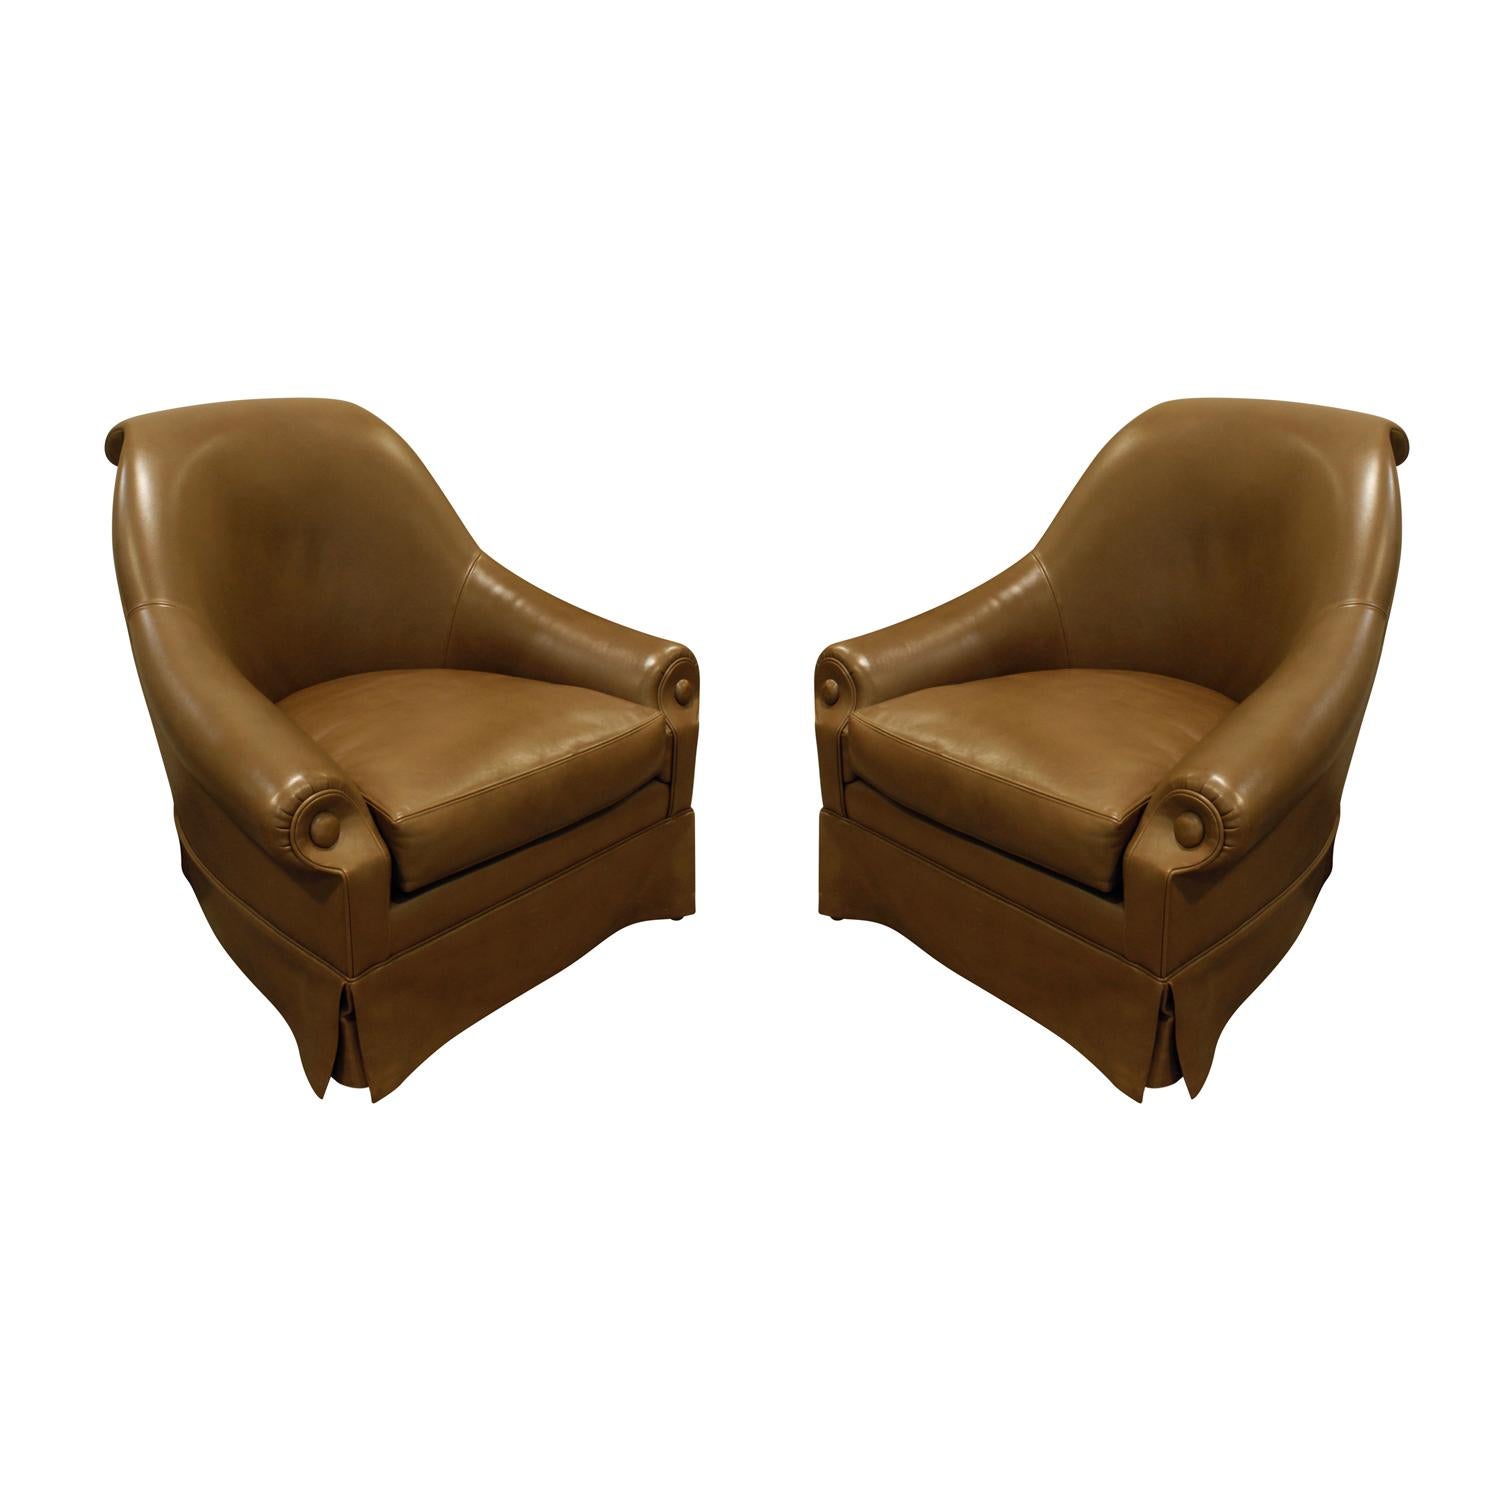 Thad Hayes Custom Pair of Barrel Back Lounge Chairs, 2000